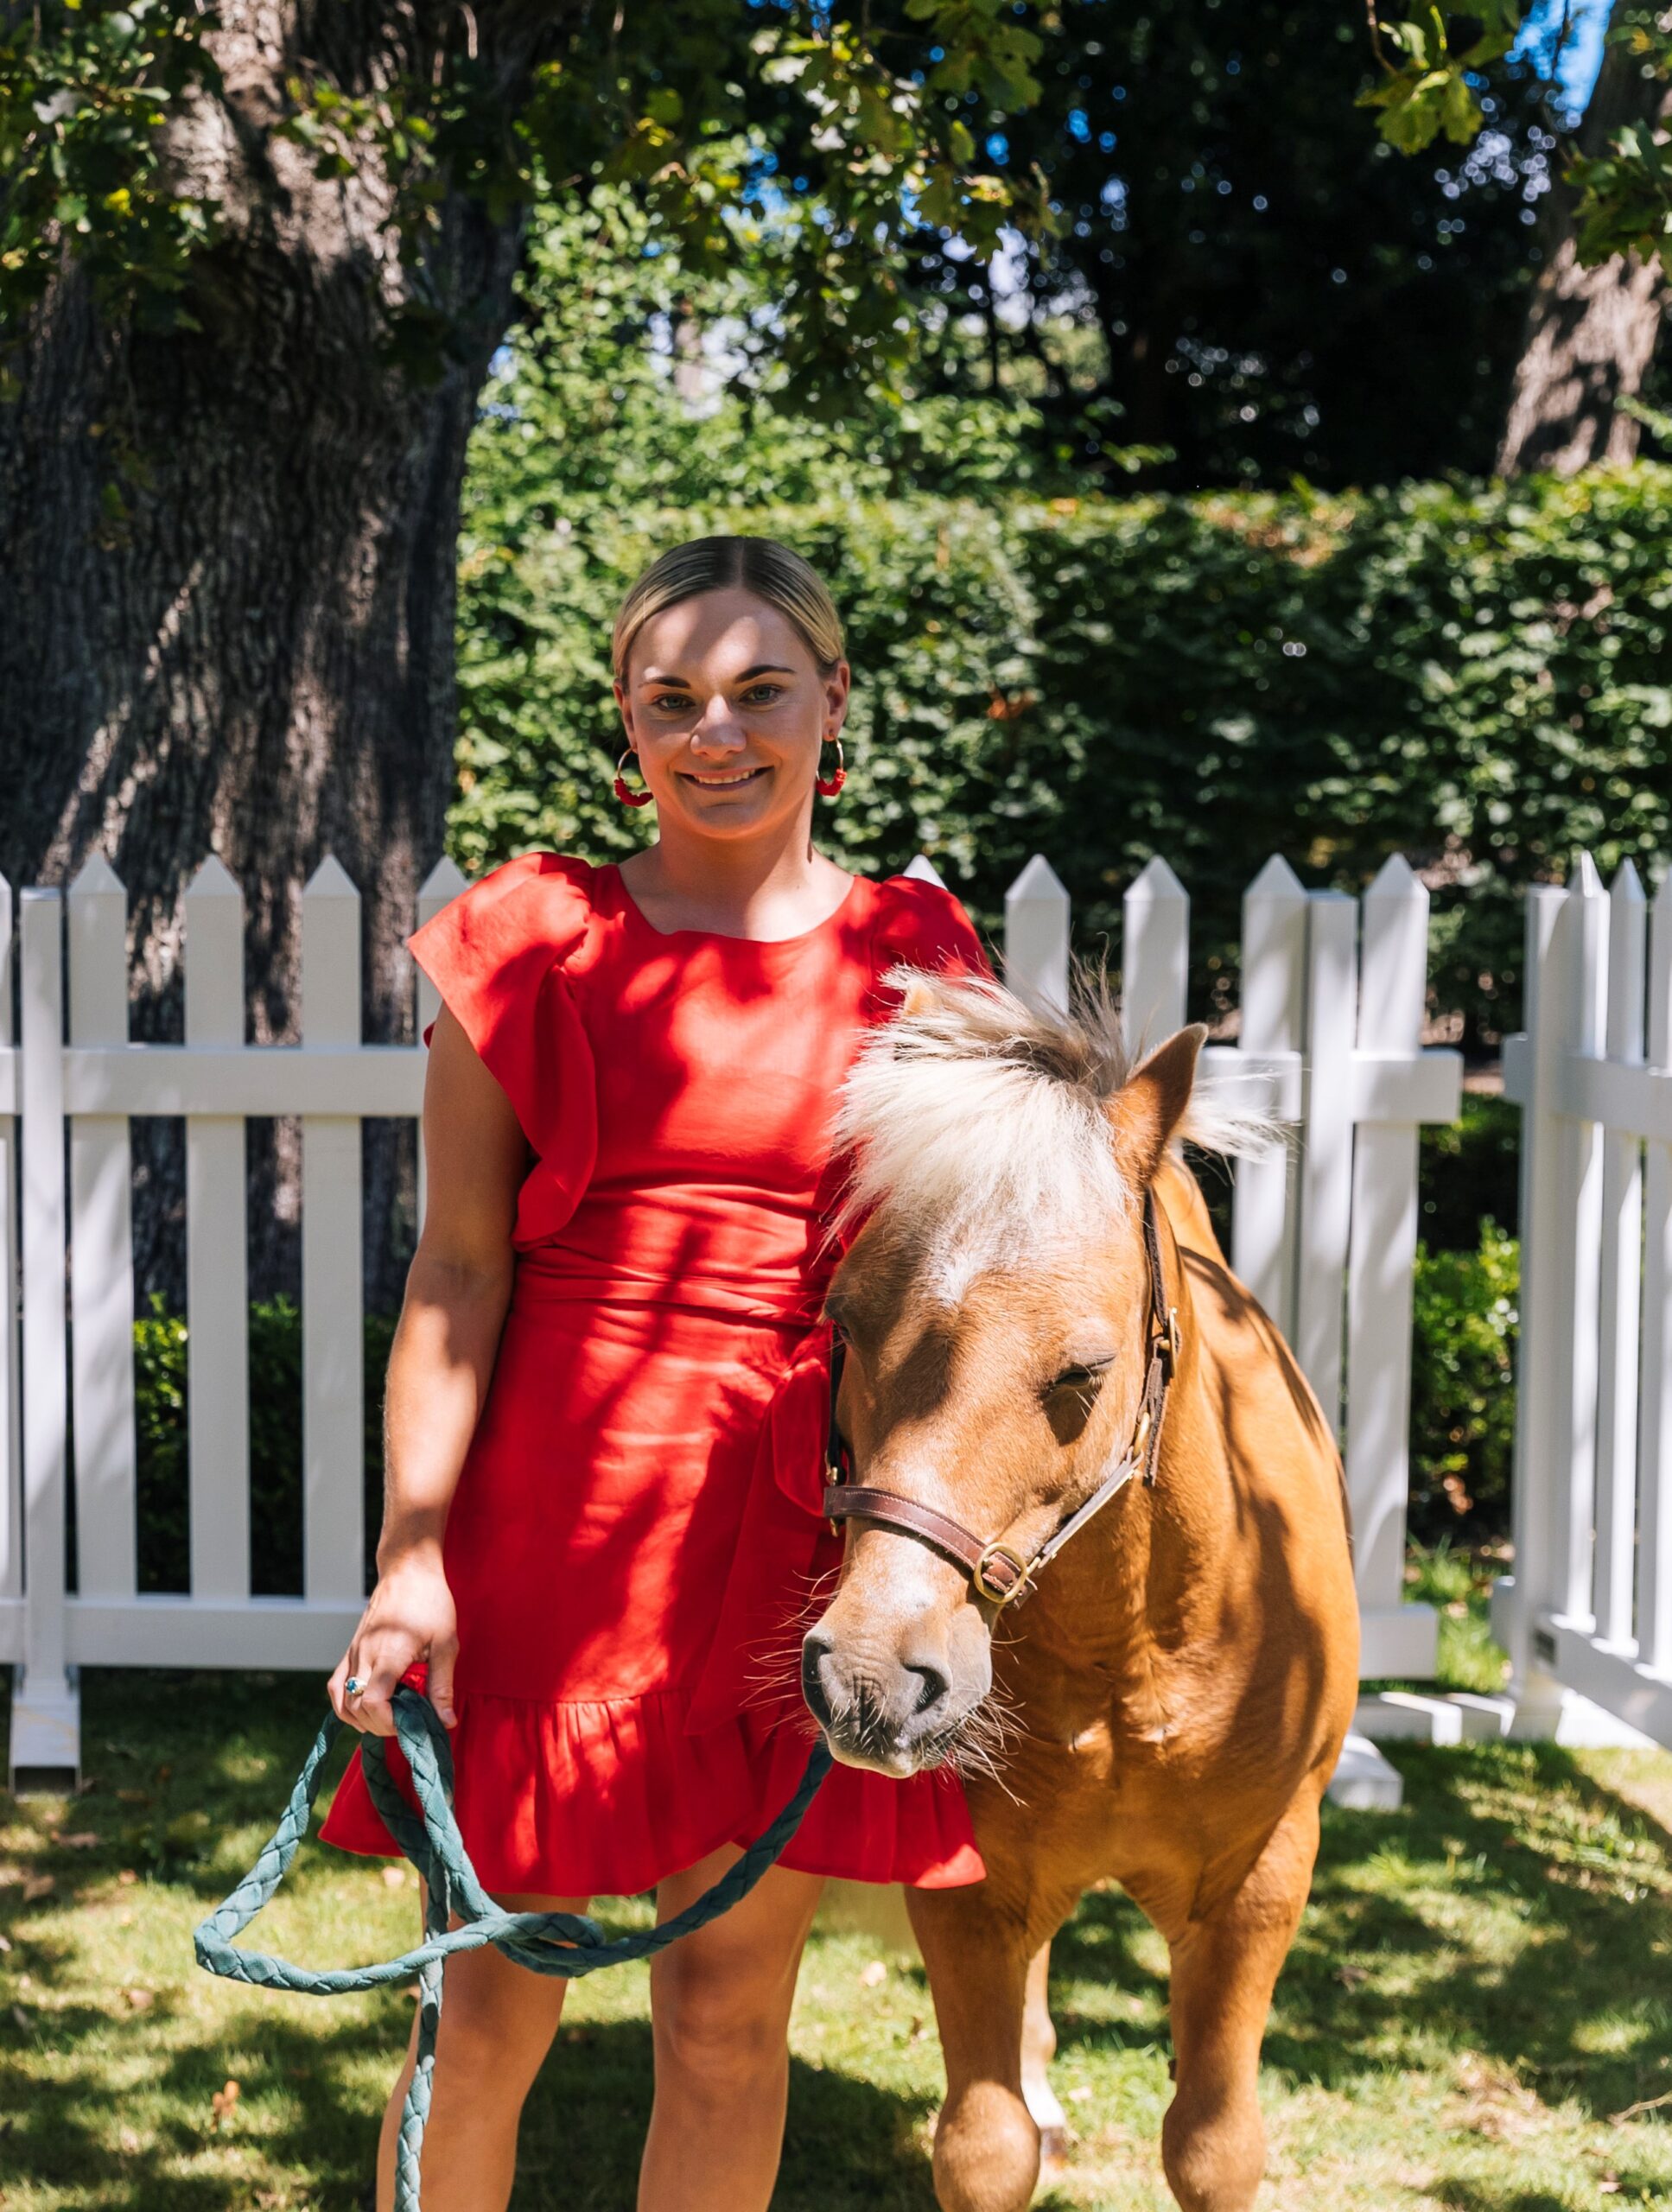 In the saddle: A chat with Danielle Johnson